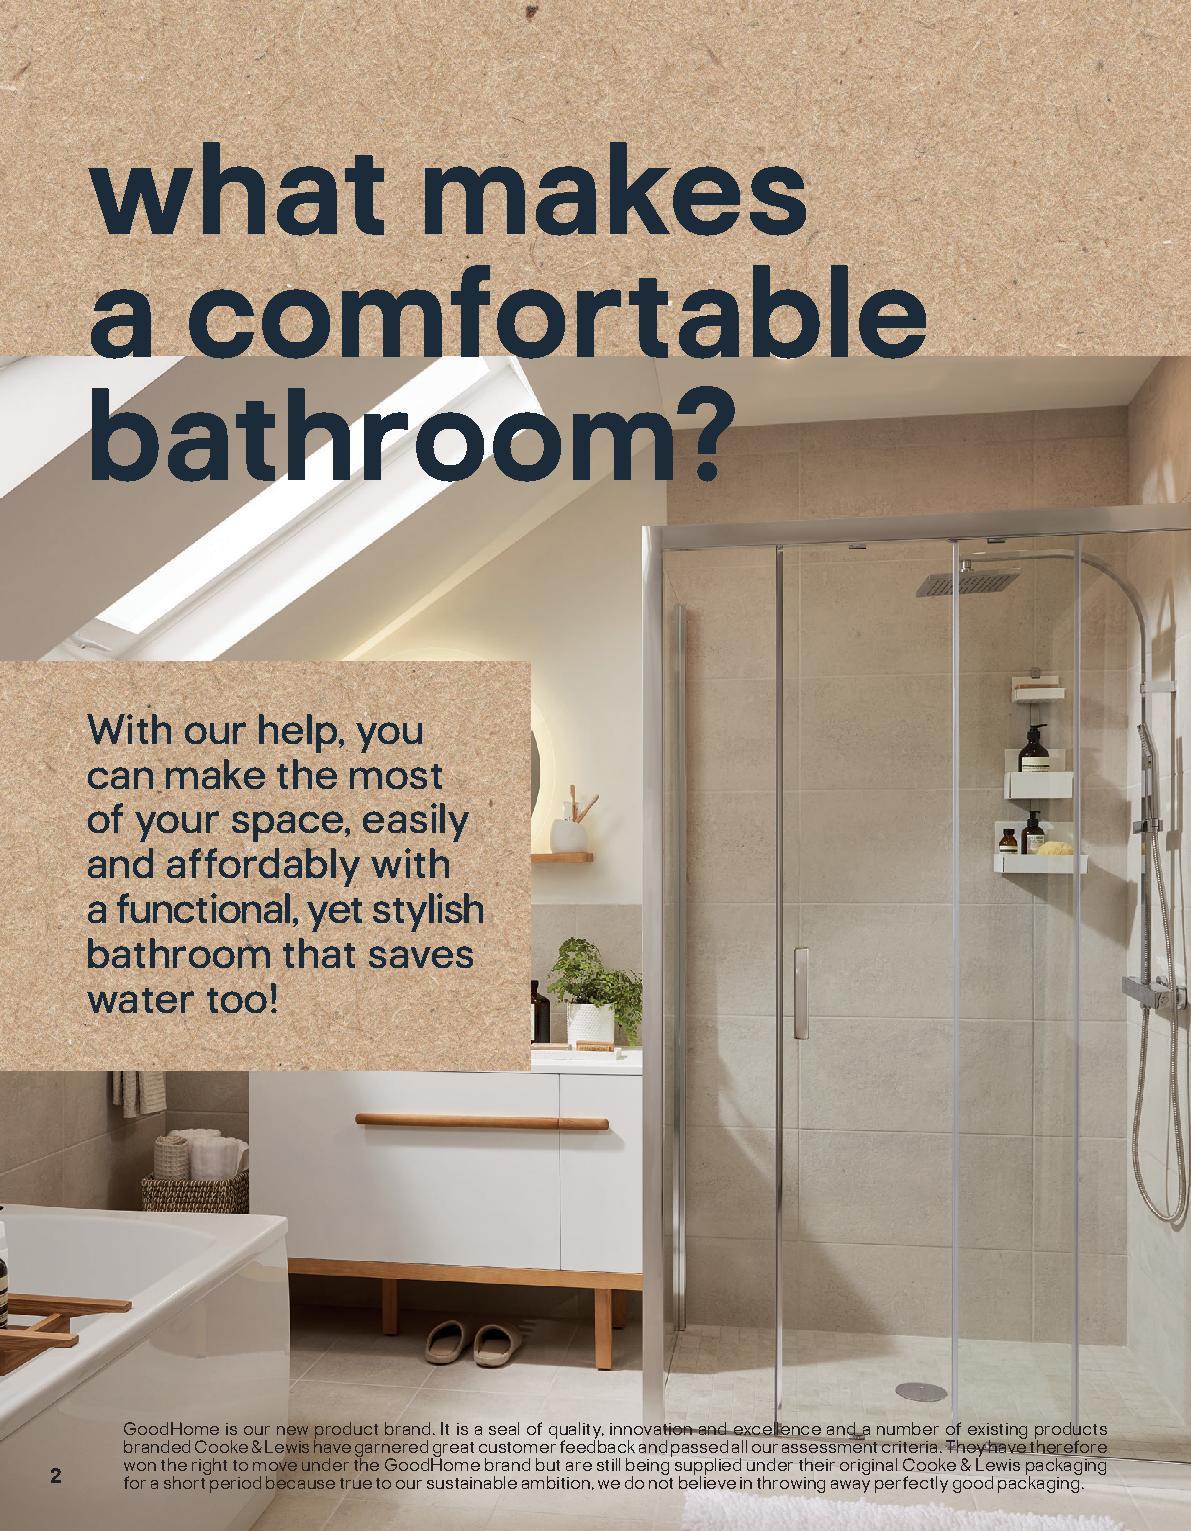 B&Q Bathroom Product Guide Offers from 1 September